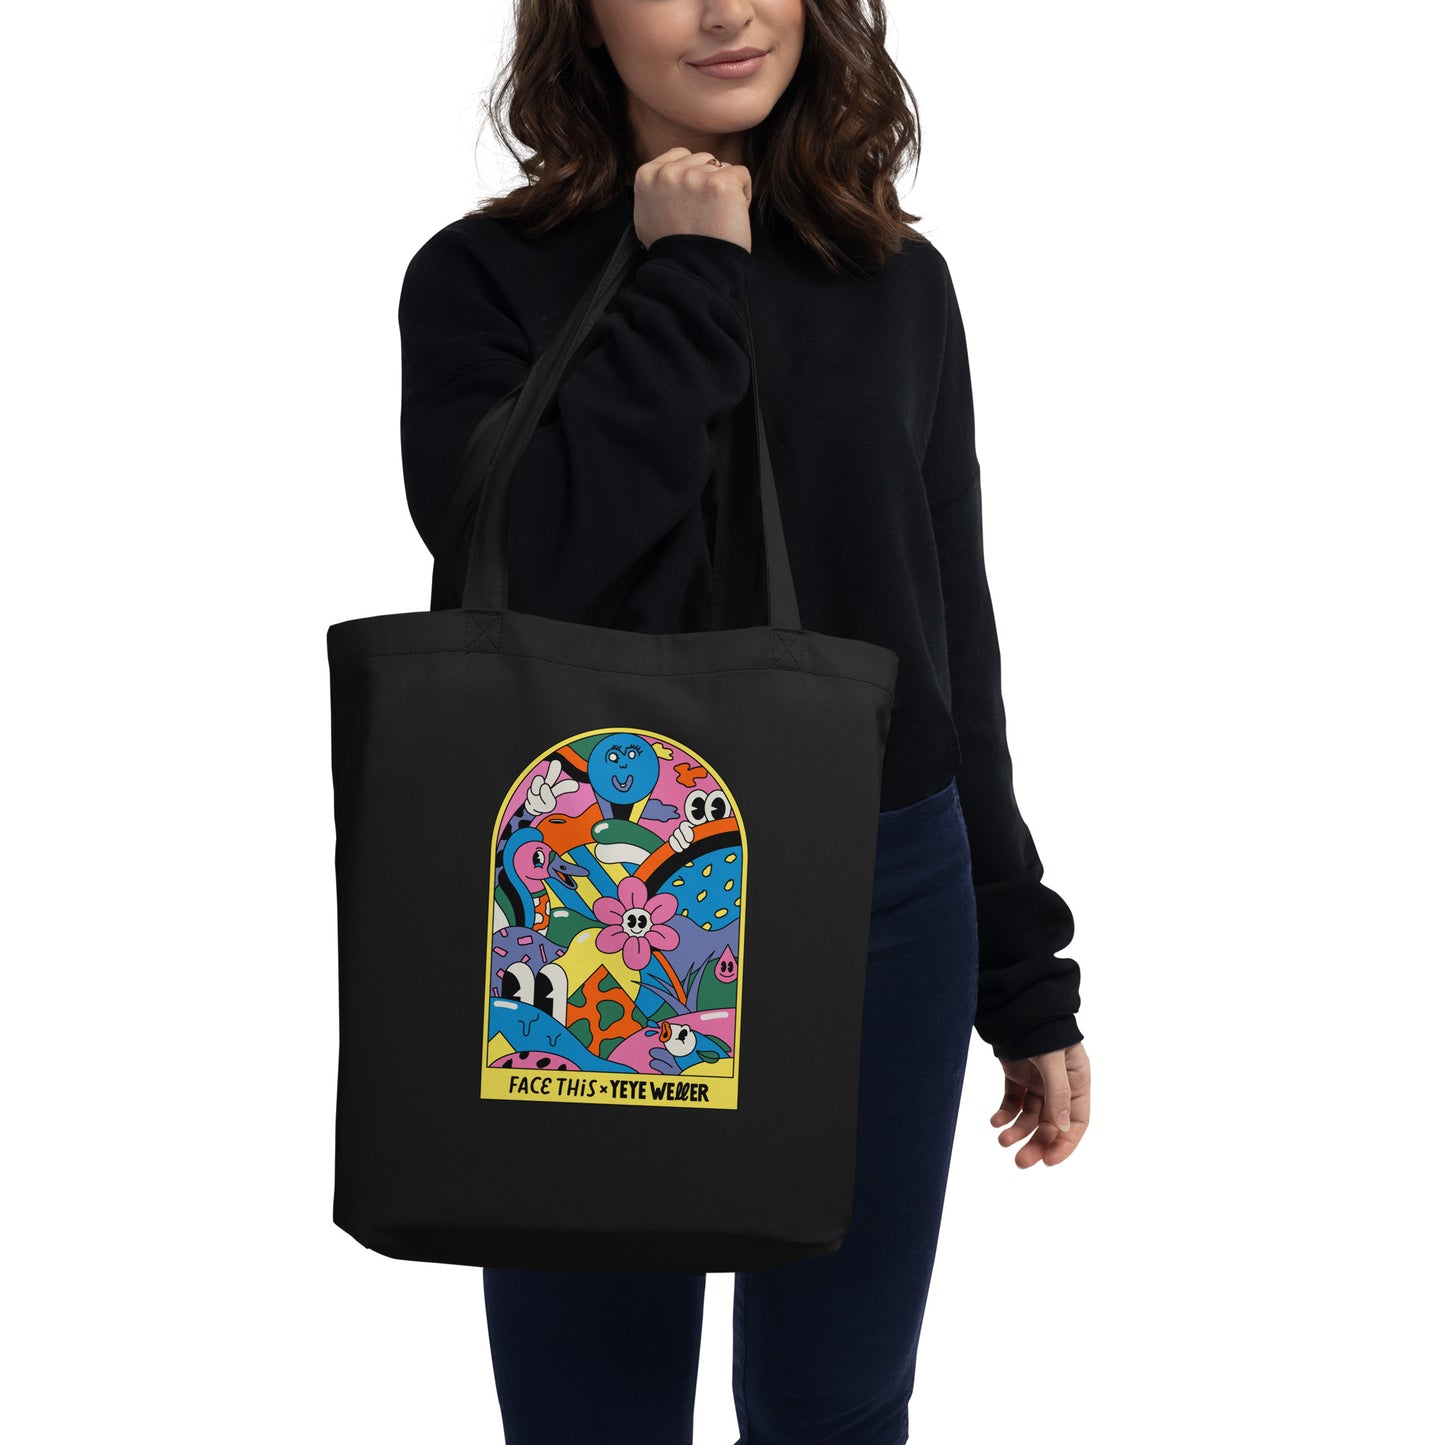 Yeye Weller x Face This Eco Tote Bag